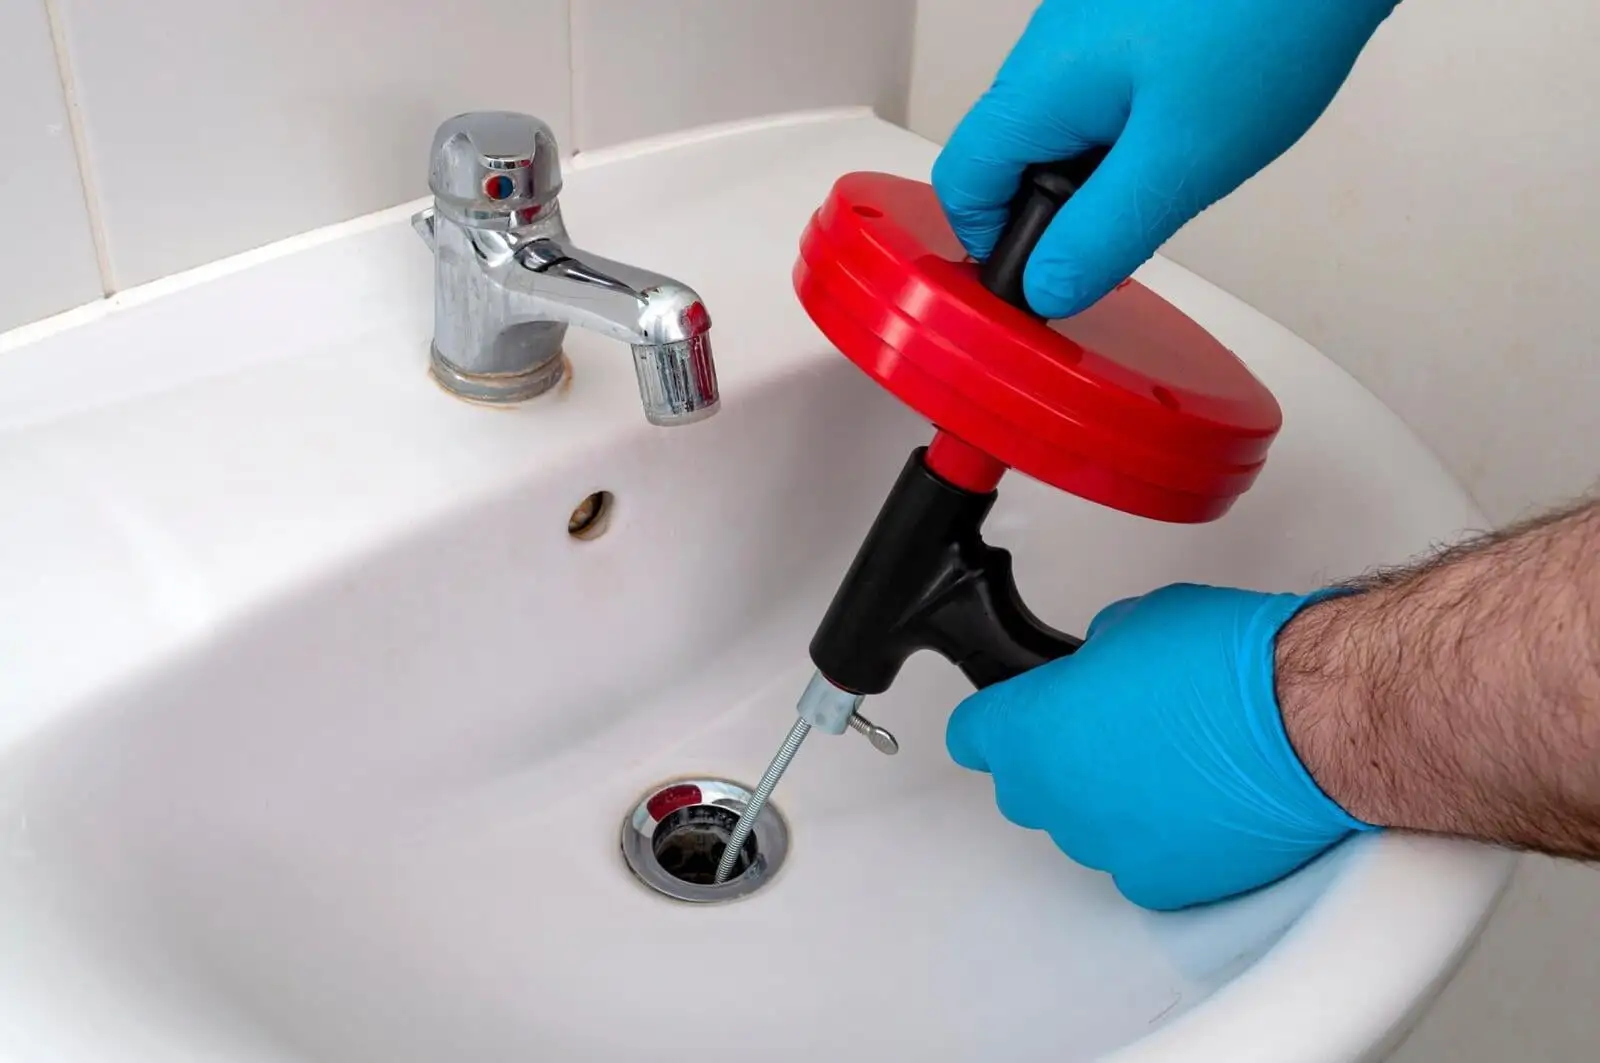 sewer drain cleaning services in houston